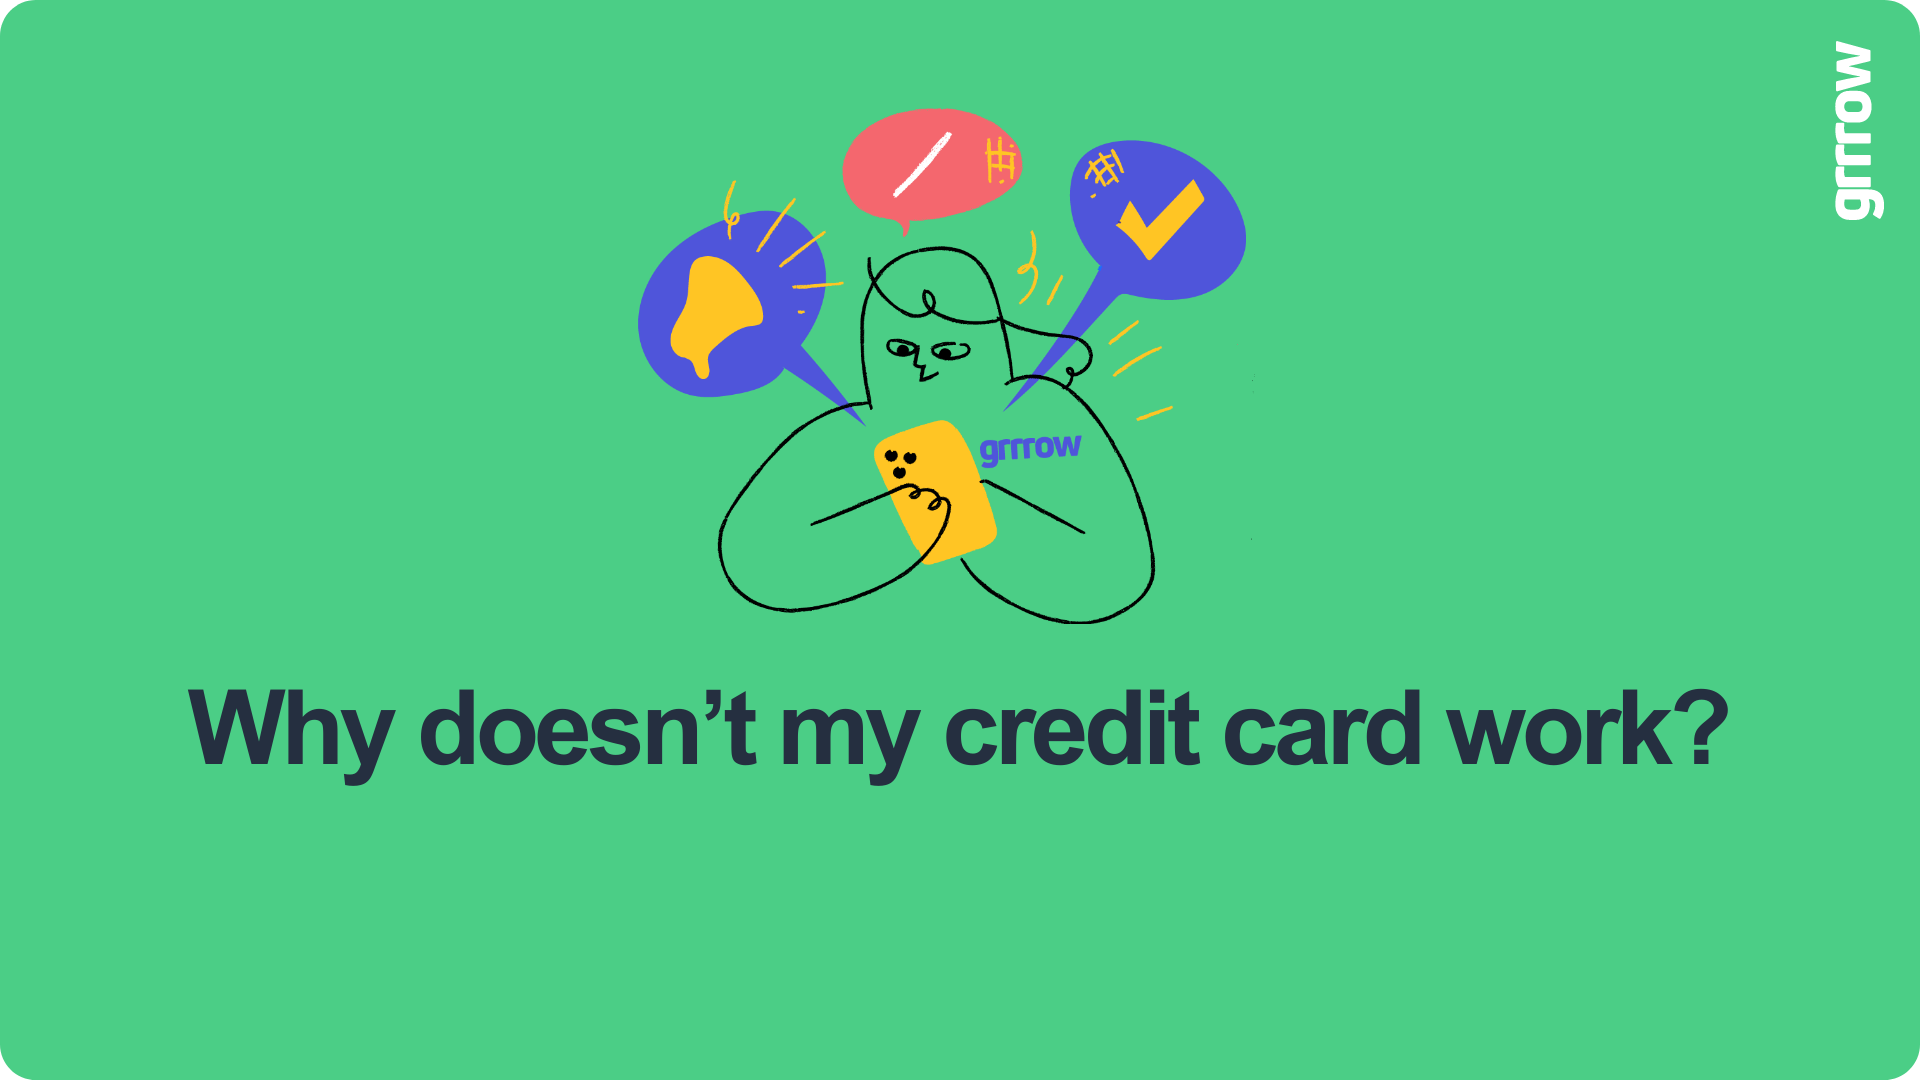 Why doesn’t my credit card work?